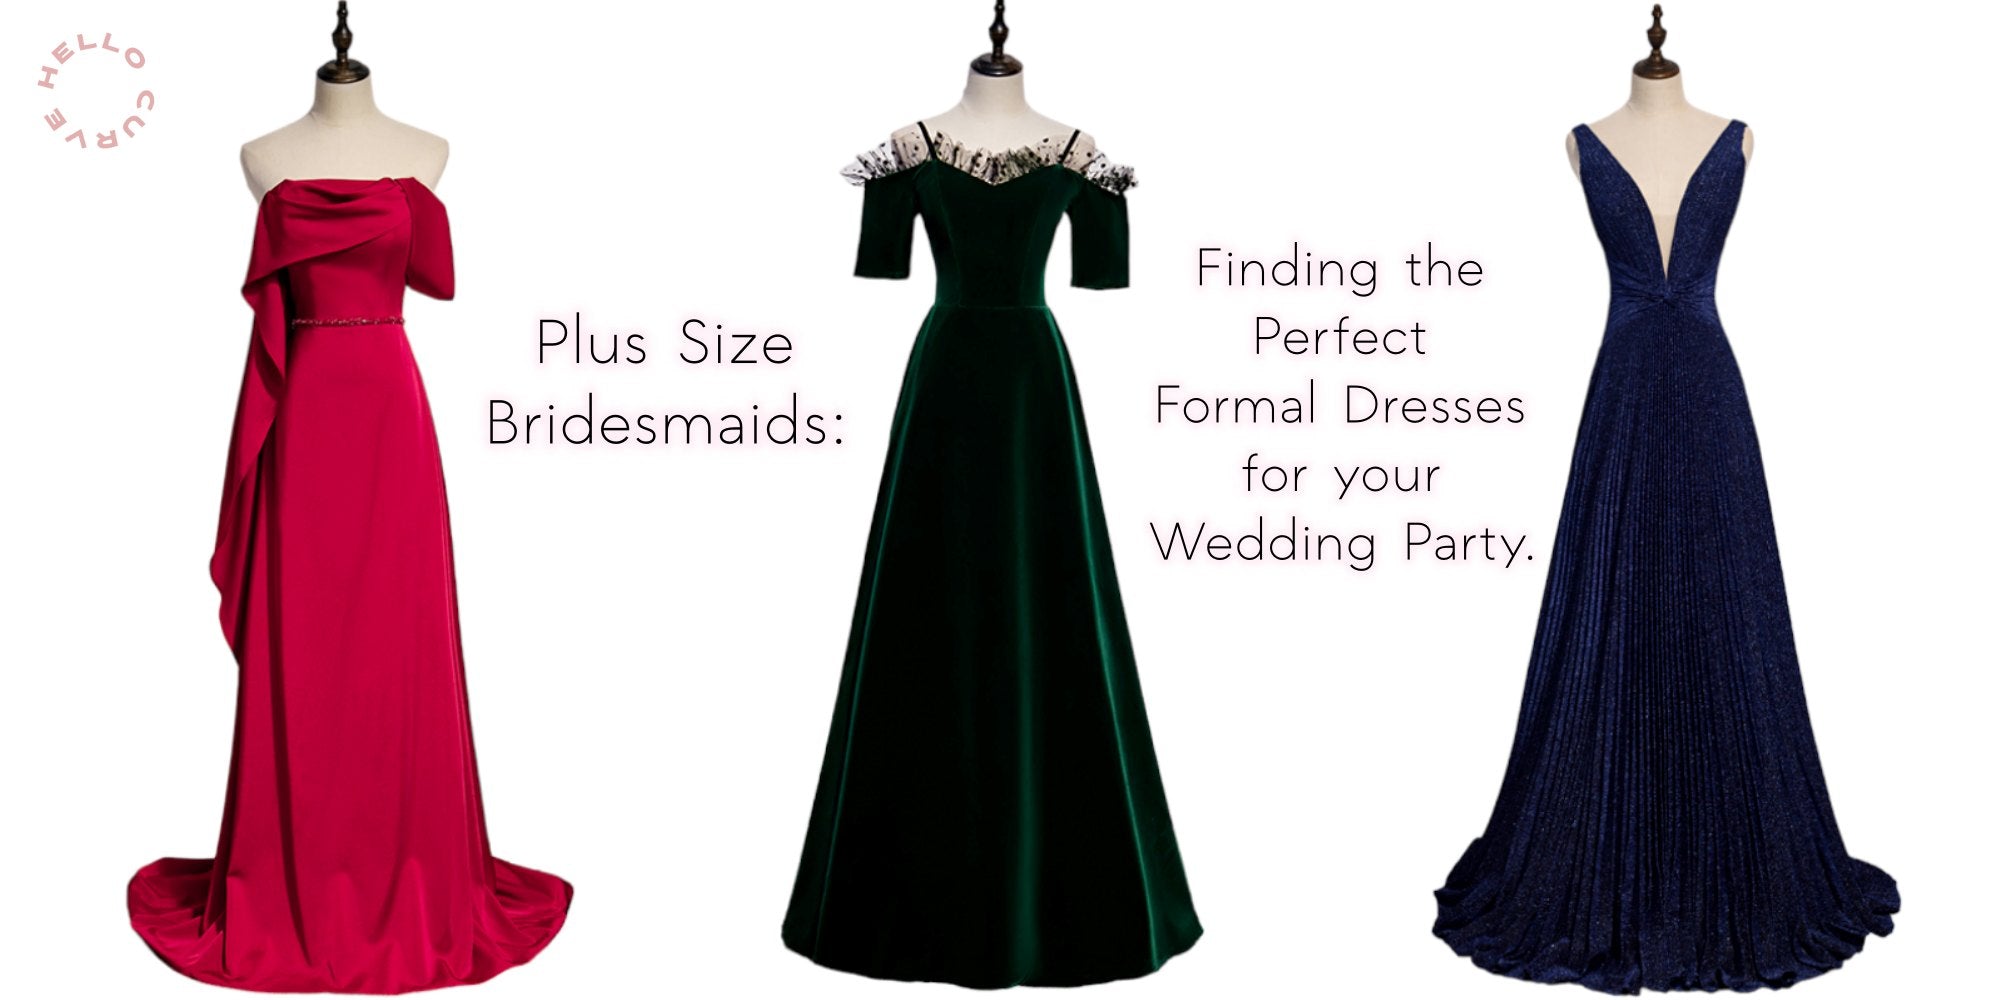 Plus Size Bridesmaids: Finding the Perfect Formal Dresses for Your Wedding Party